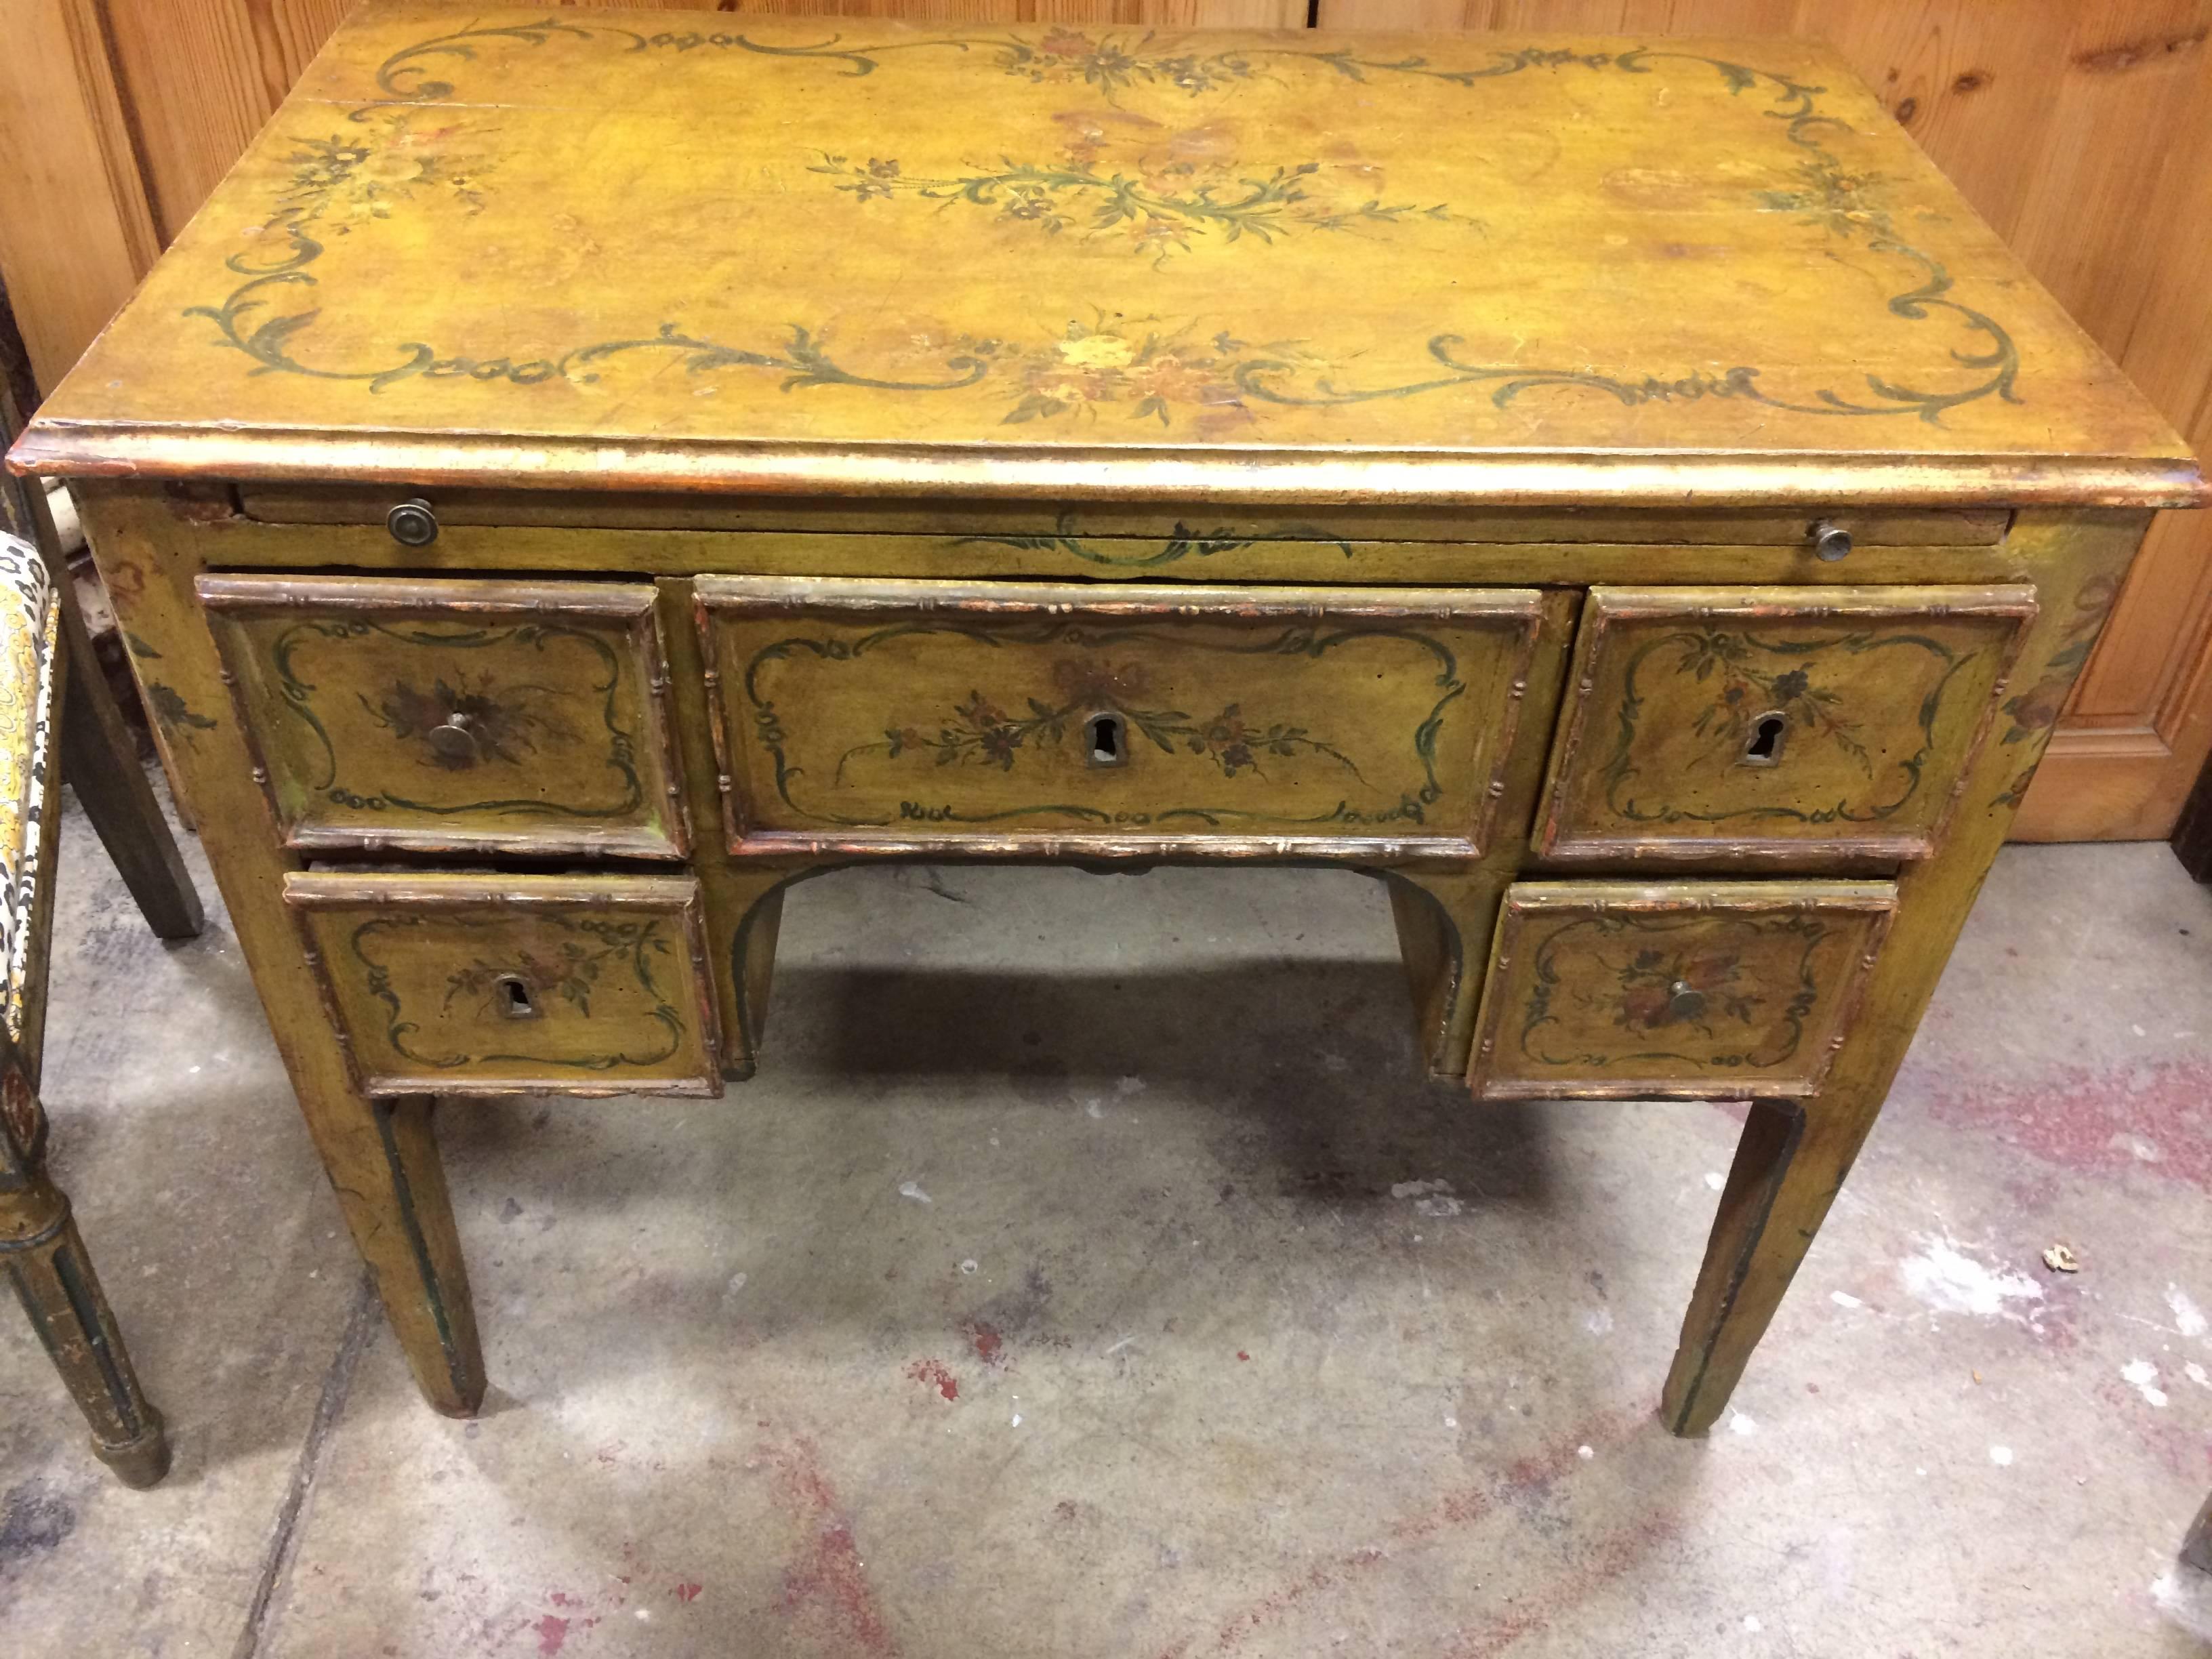 18th century Venetian dressing table with brushing slide with mirror five small drawers polychrome flowers on yellow ground.

Measures: 26.5'' H x 31.5'' W x 19'' D.
Vanity, sofa table, bed size table, entry table.